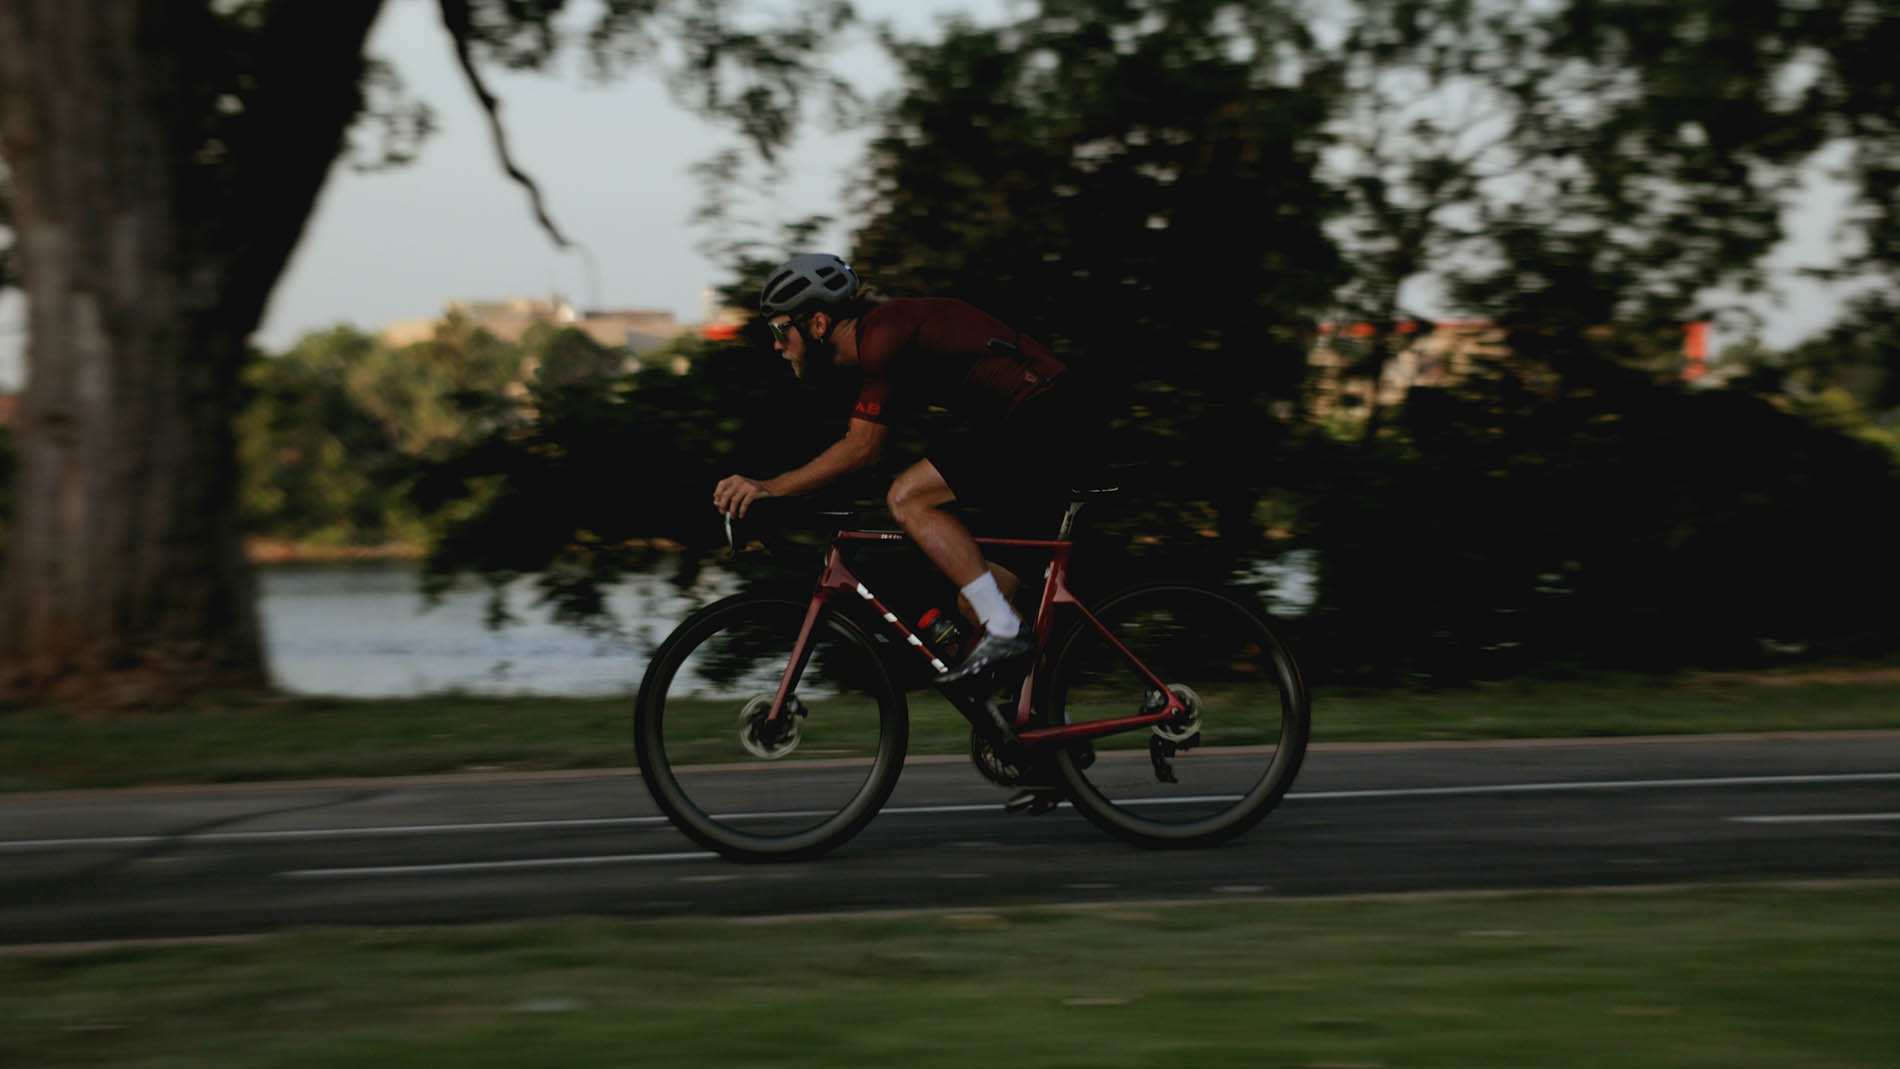 A cyclist in motion, wearing a helmet and dark athletic gear, rides a road bike along a tree-lined path at dusk, with slight motion blur emphasizing speed. This exercise is part of a physical therapy